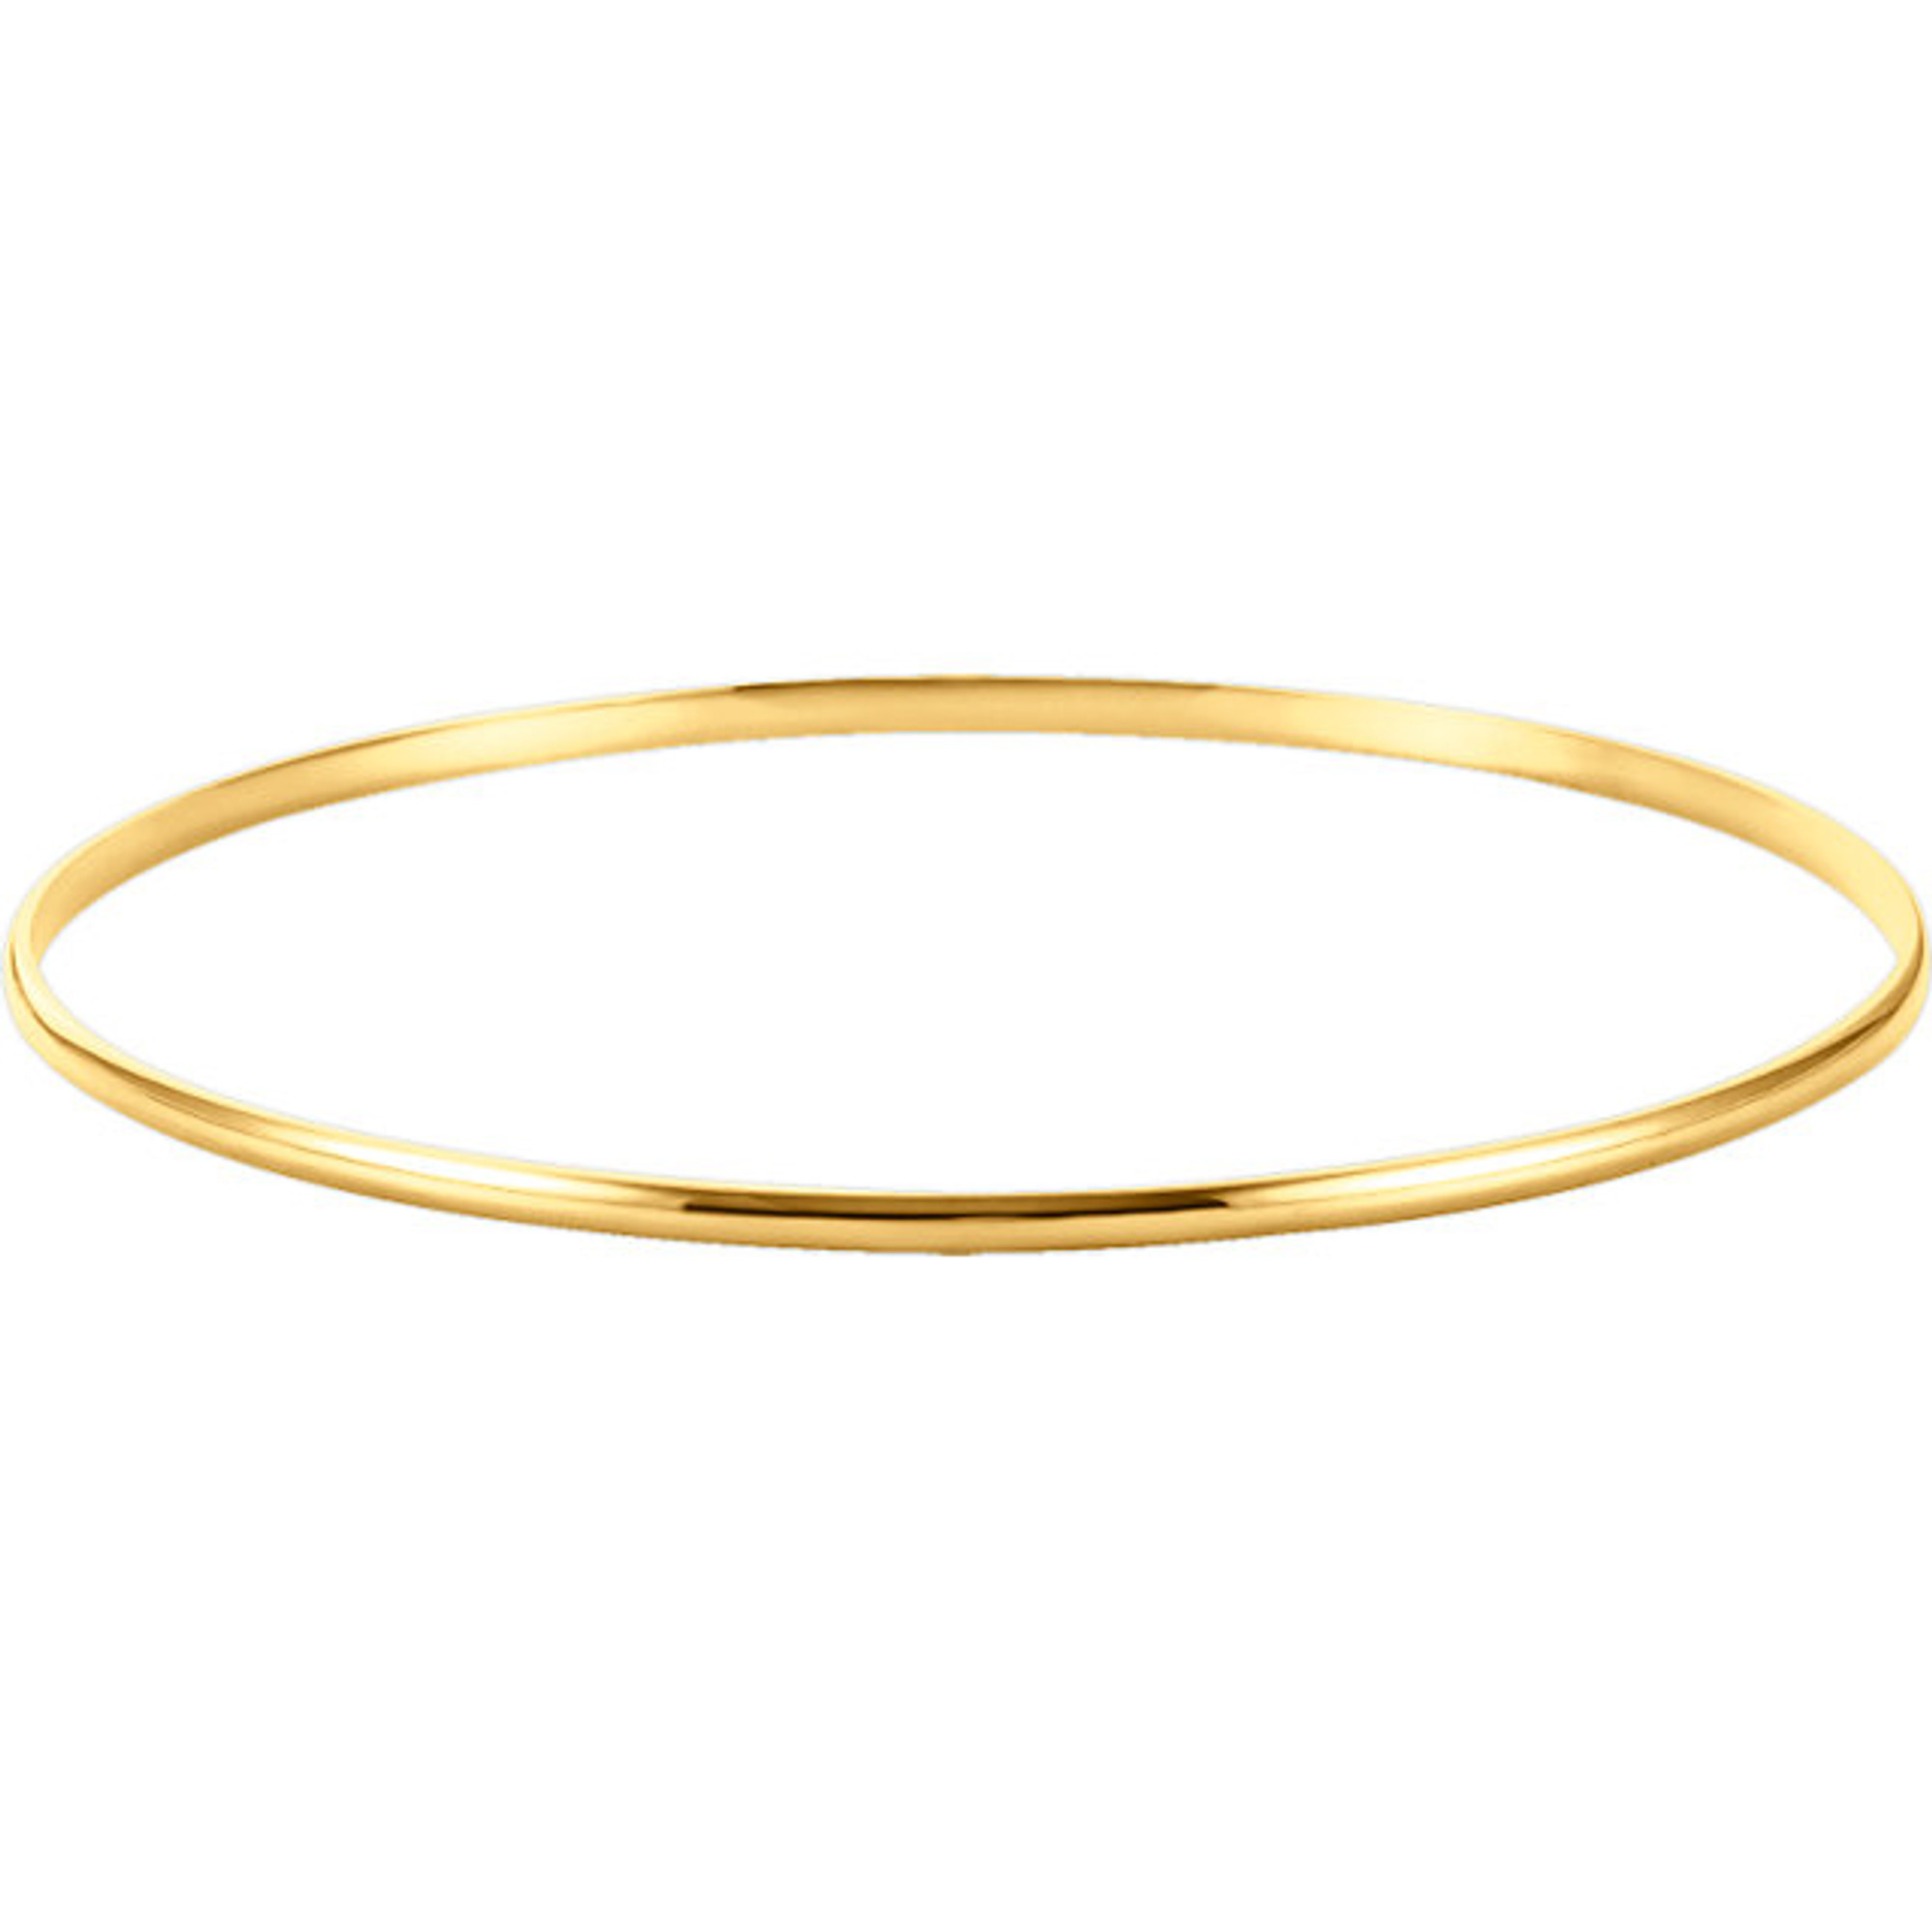  Solid 14k Yellow Gold Wide Oval Bangle Bracelet for Women -  Flat Plain Gold 6 mm Heavy Bangle - Length 6 to 8 Inches available -  Handmade in USA : Handmade Products